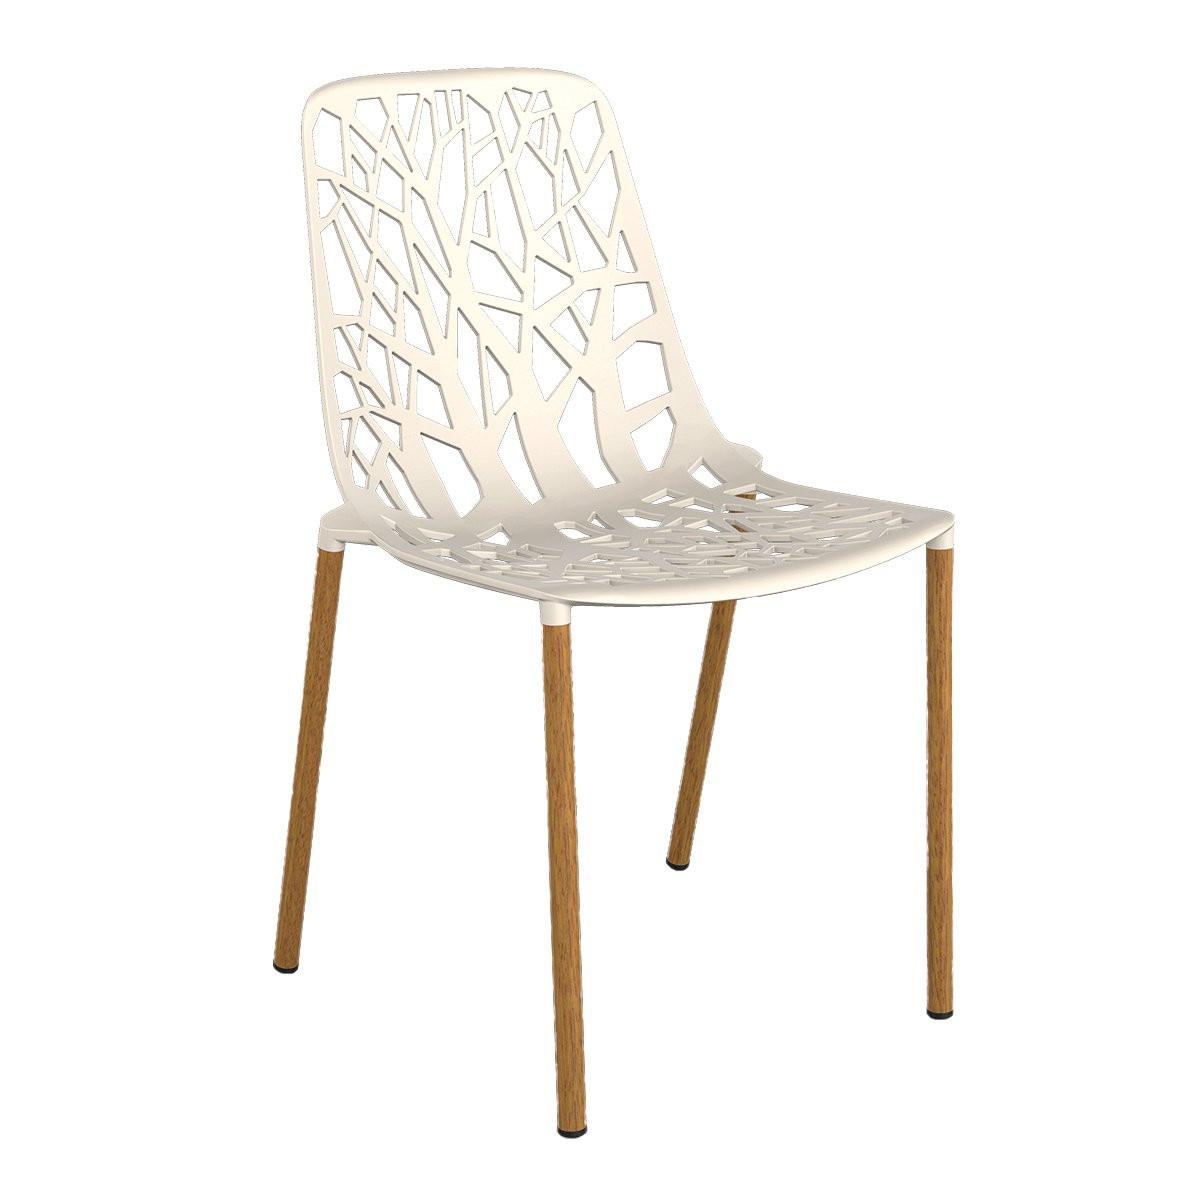 Fast Forest Chair Iroko Legs